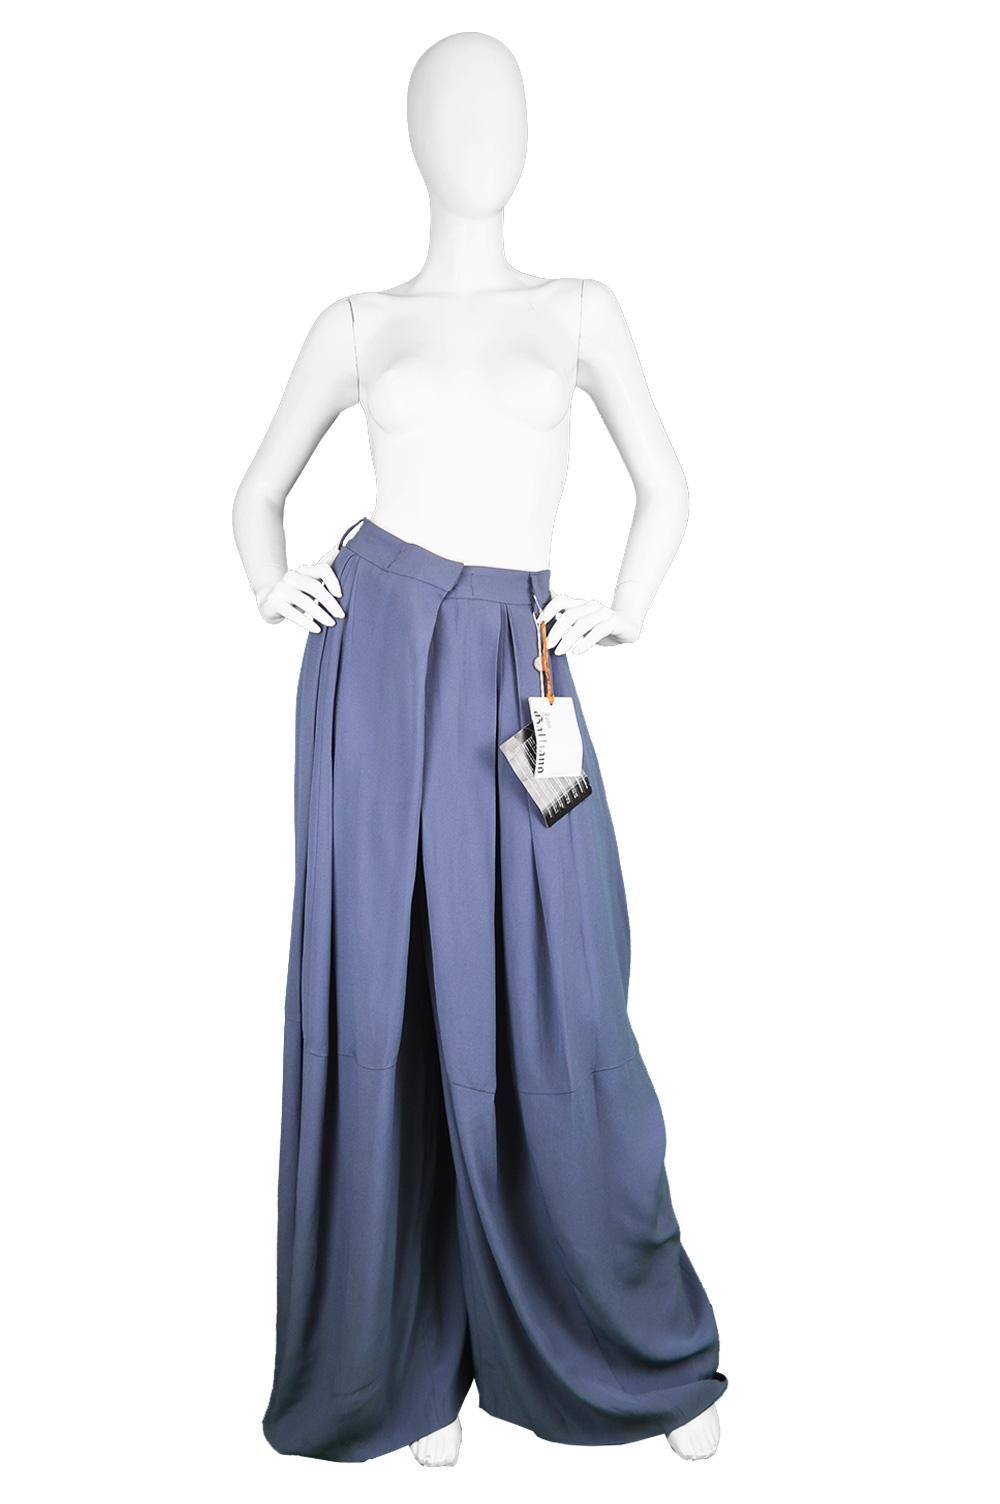 An incredible and avant garde women's or men's pair of John Galliano palazzo pants. In a blue crepe with an ultra wide leg that is pleated at the top to give an even more dramatic, voluminous look which looks like a maxi skirt until the wearer's